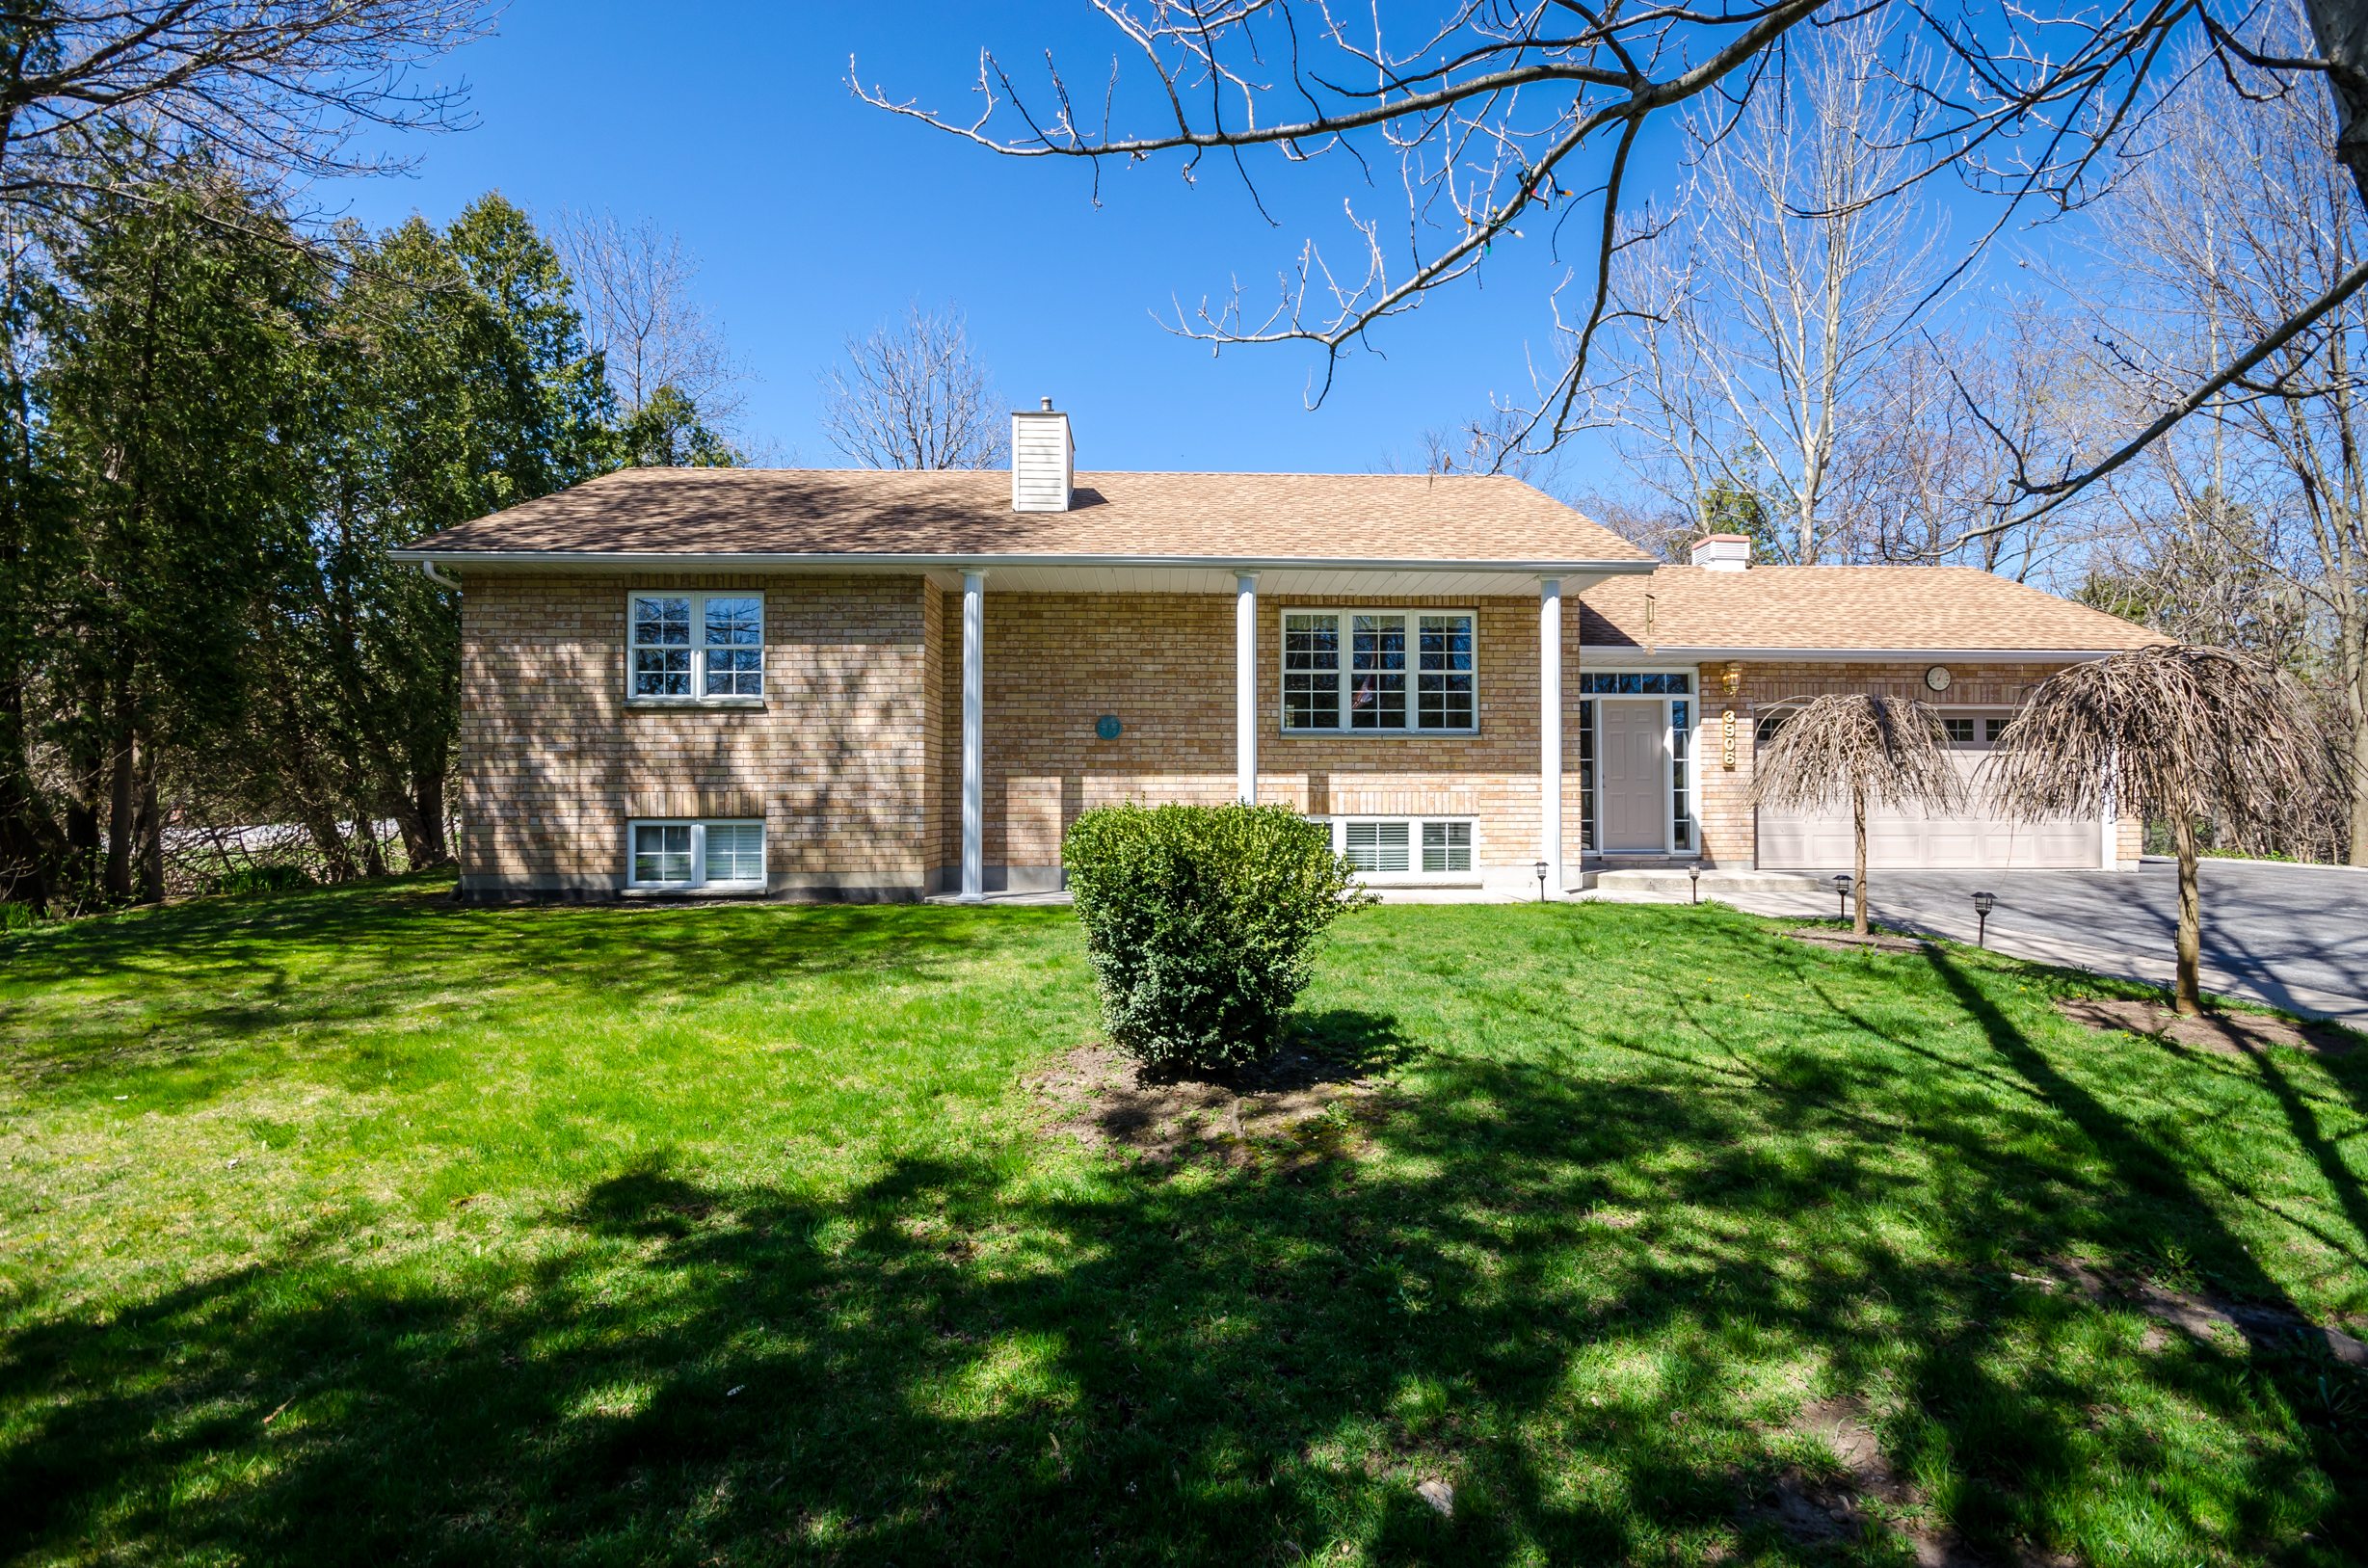 3906 Richview Rd, Innisfil | The Fournier Experience